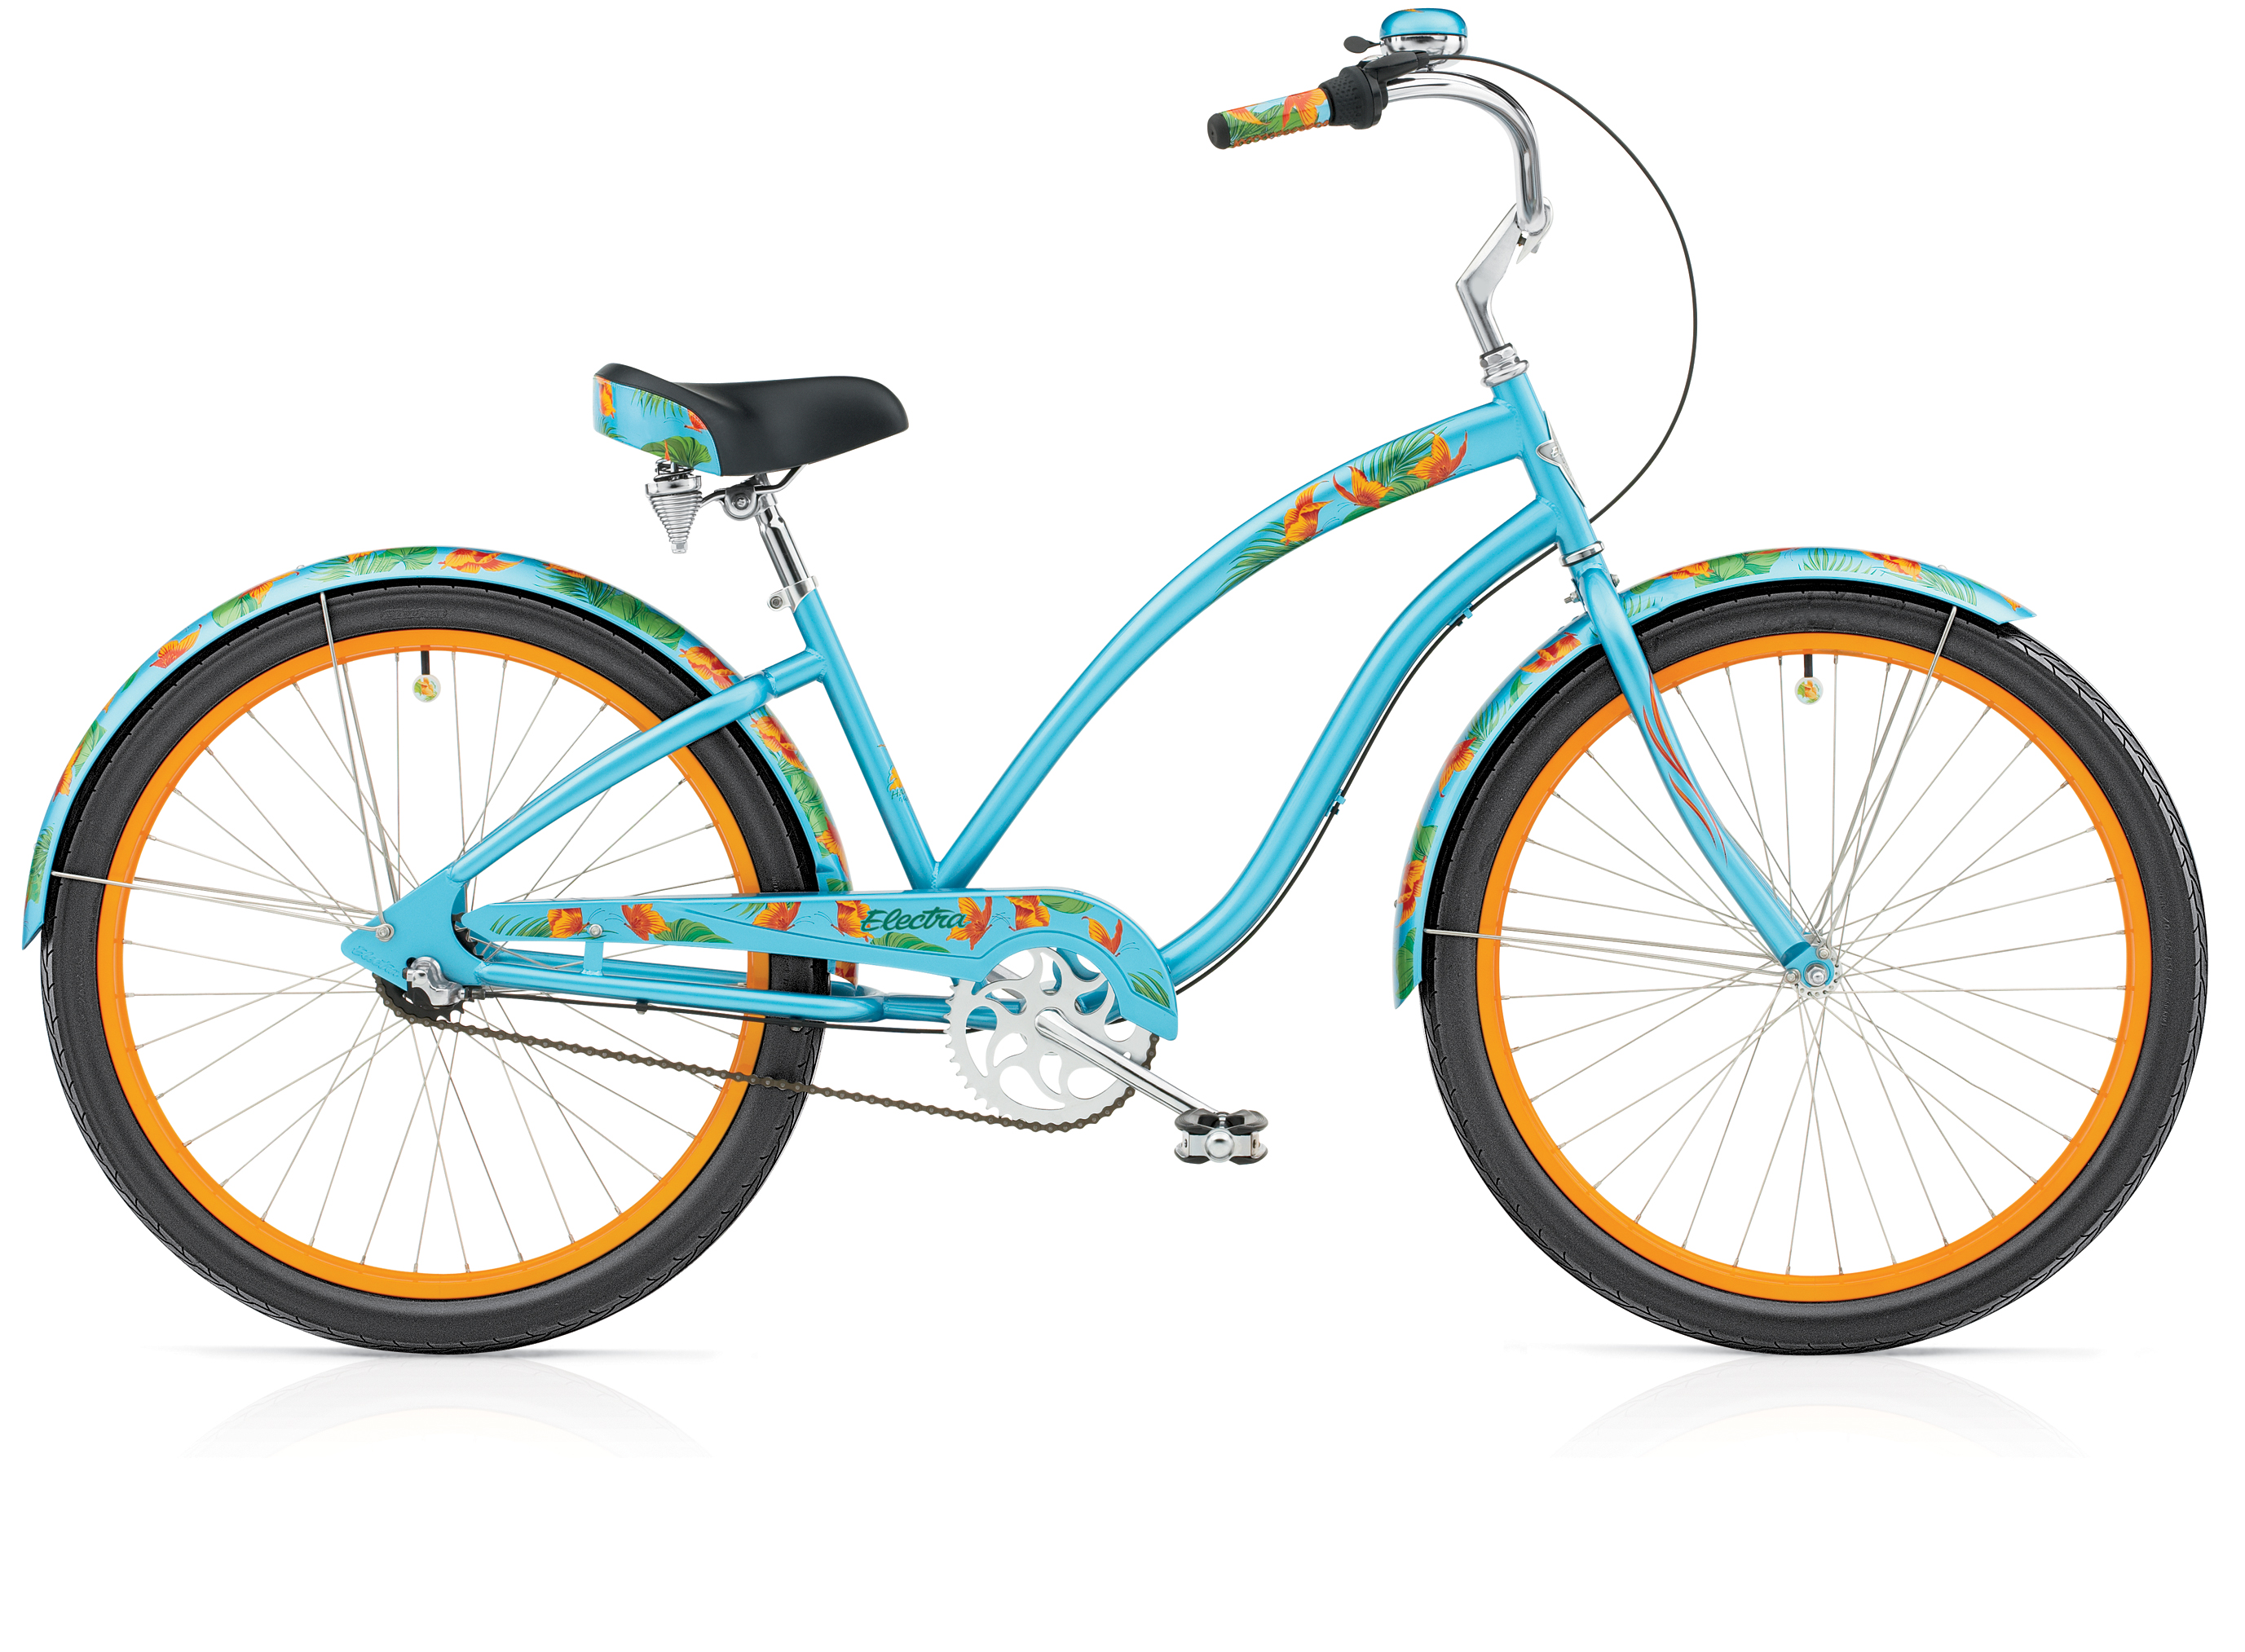 Itâ€™s time Ladies to get the cruiser bike of your dreams!!